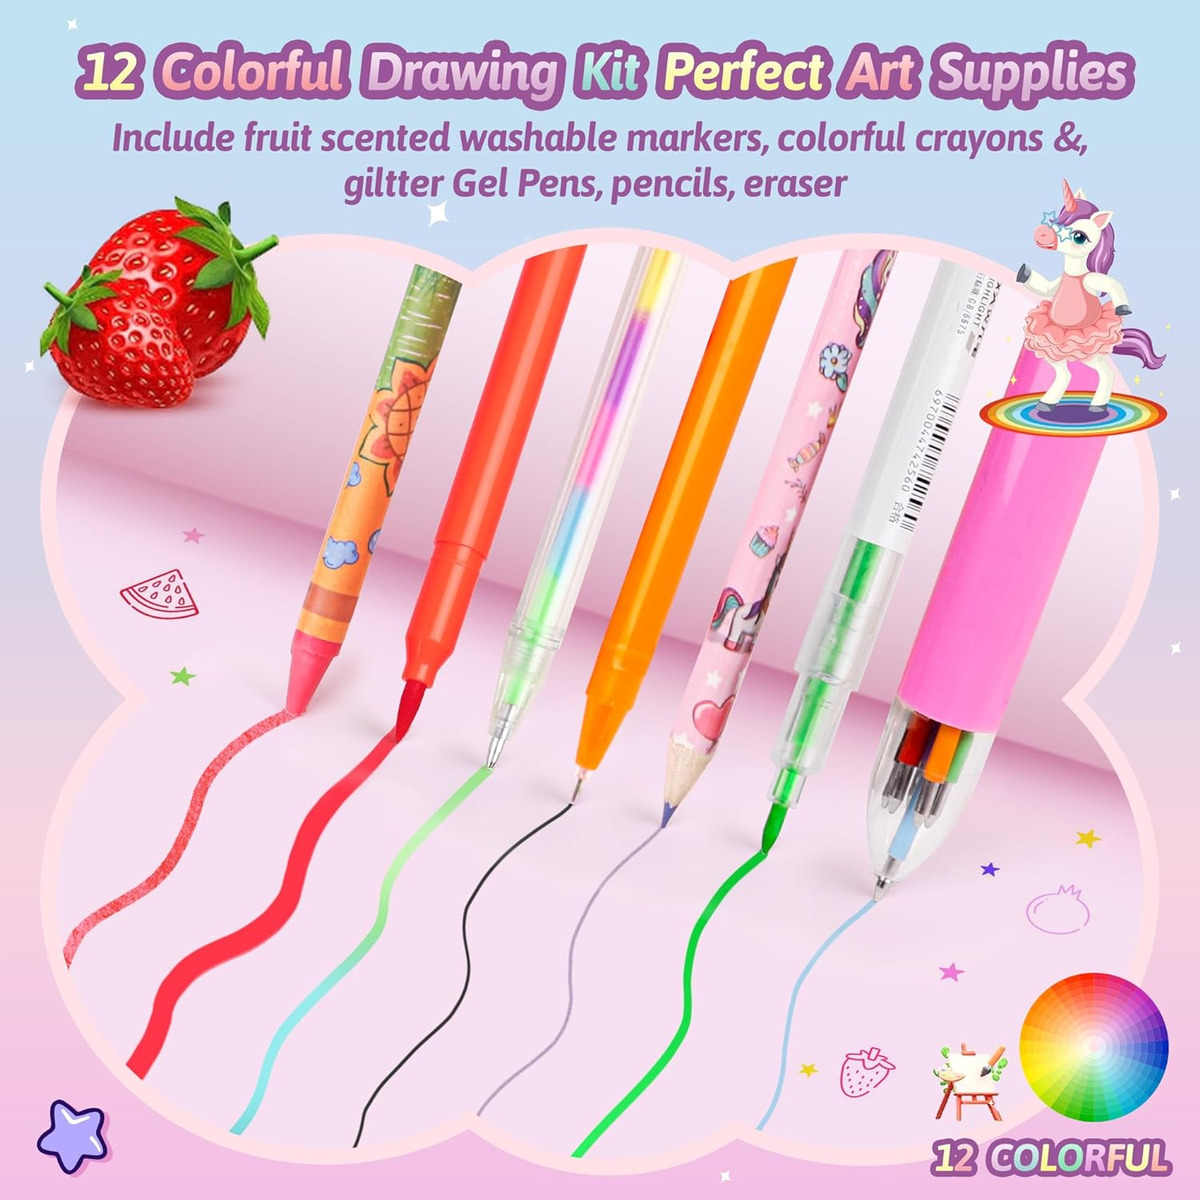 Unicorn Fruit Scented Markers Set 56 Pcs, Art Supplies for Kids 4-6-8, Arts  and